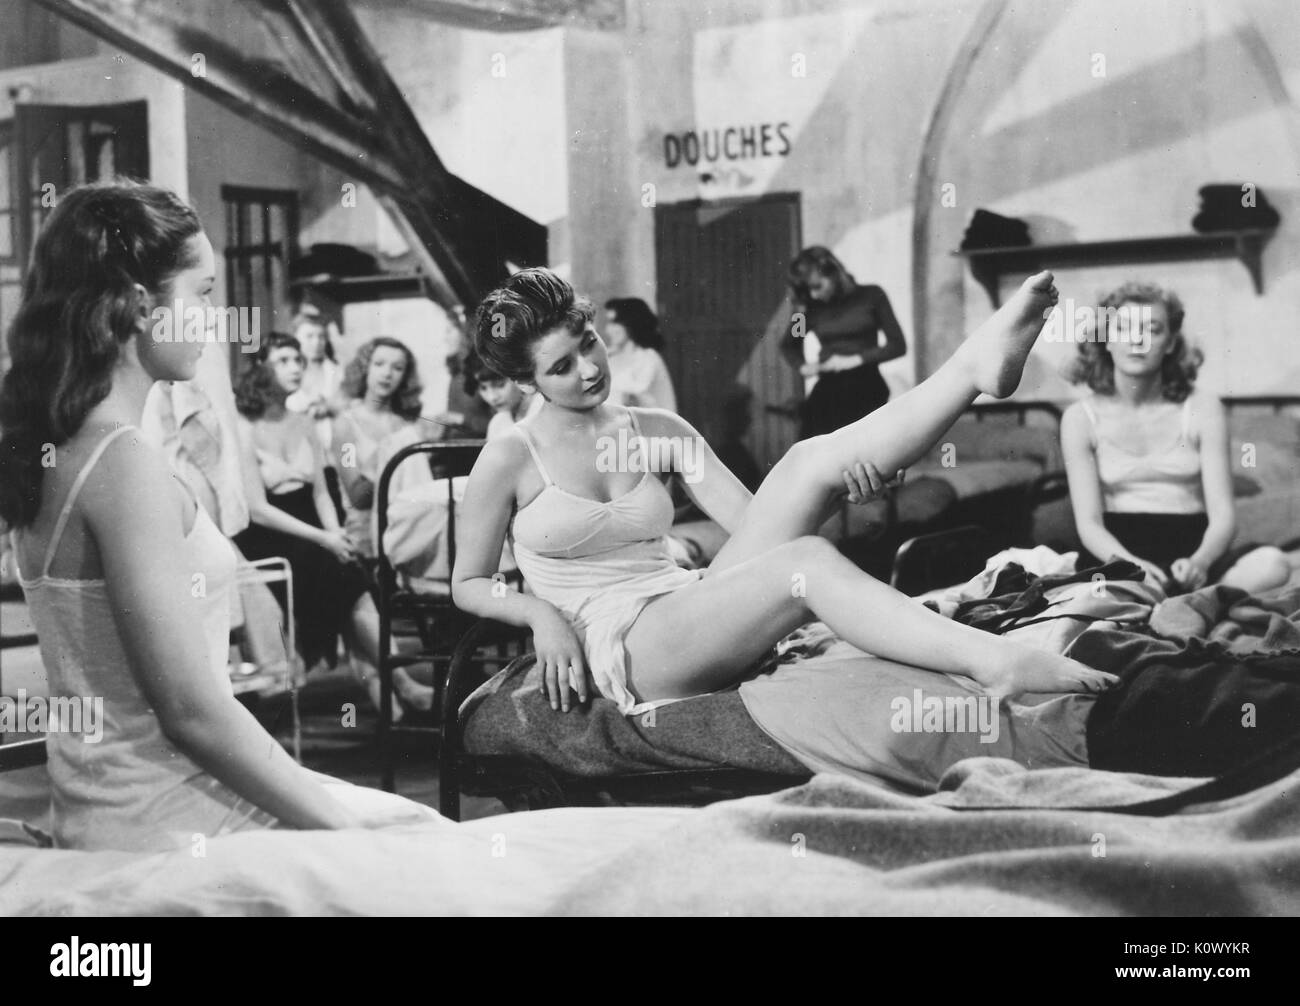 Au Royaume Des Cieux (In the Kingdom of Heaven), movie still of girls sitting on beds in a dormatory, one girl showing off her leg, from the film noir movie by director Julien Duvivier, which tells the story of girls in a female reformatory who are persecuted by a sadistic head warden, and who attempt to escape with the help of the heroines lover, played by Serge Reggiani, 1949. Stock Photo